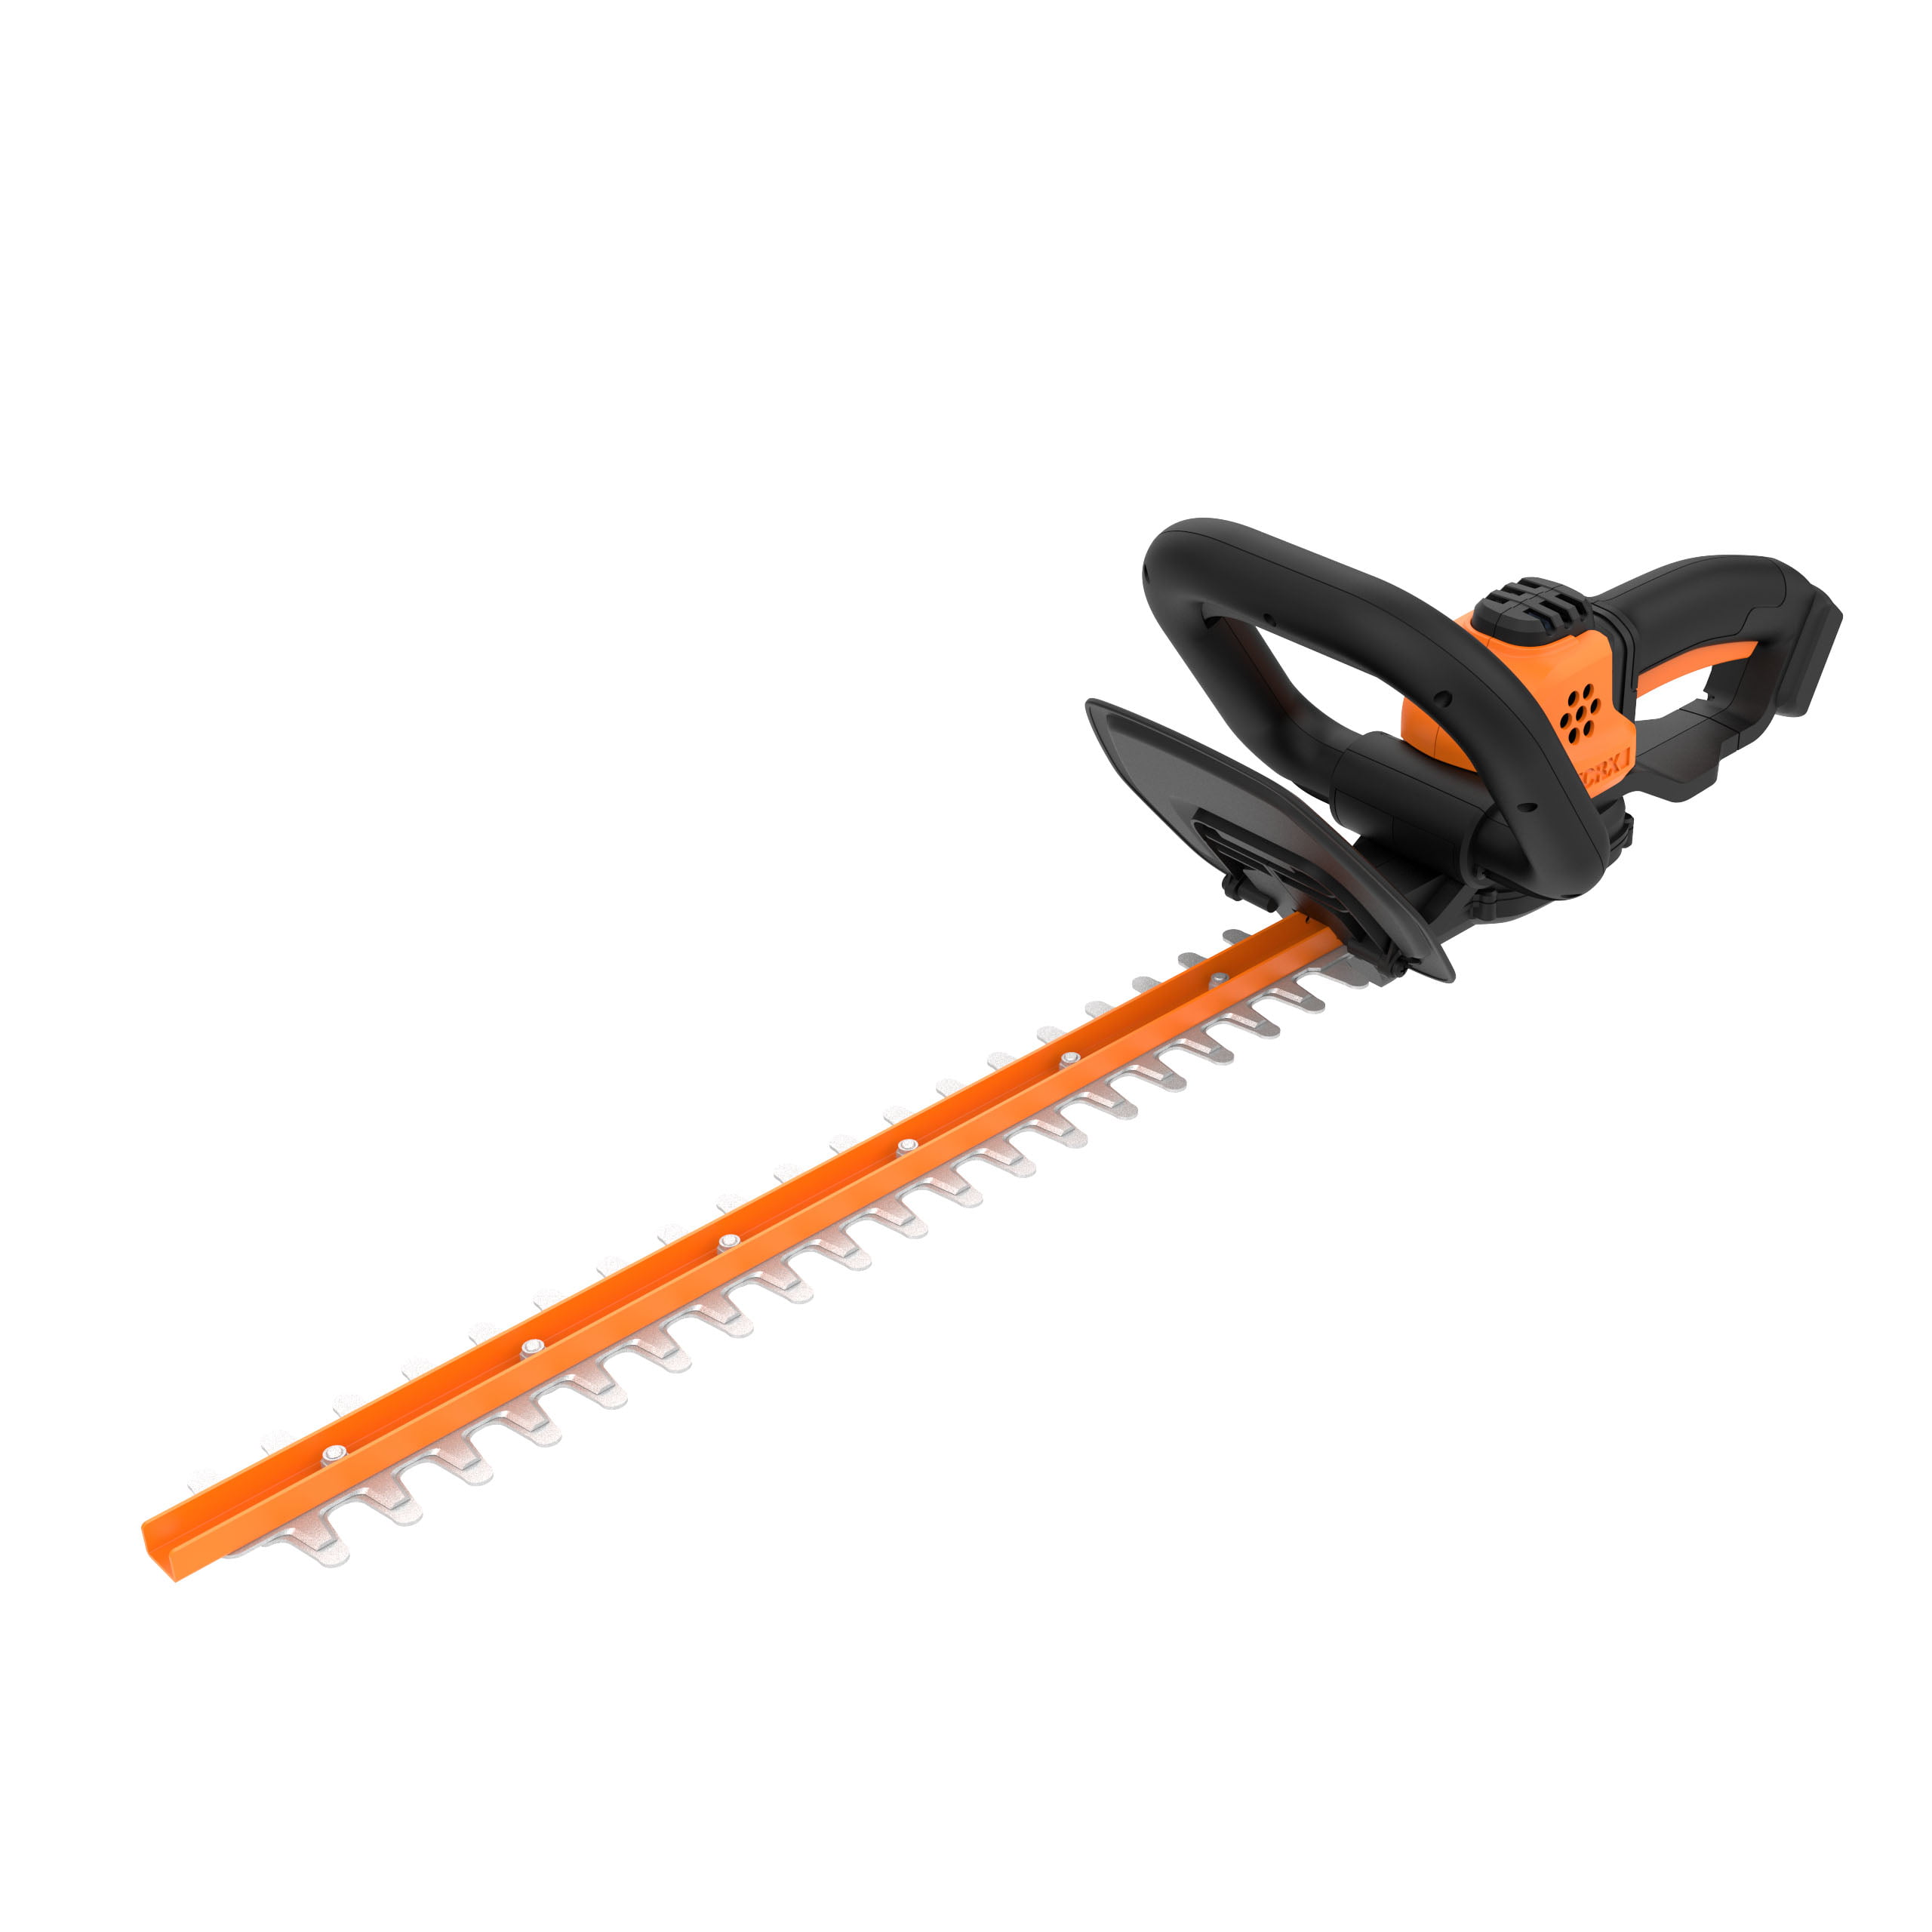 WORX WG261.9 20V Power Share 22-Inch Cordless Hedge Trimmer Bare Tool Only,Blac 